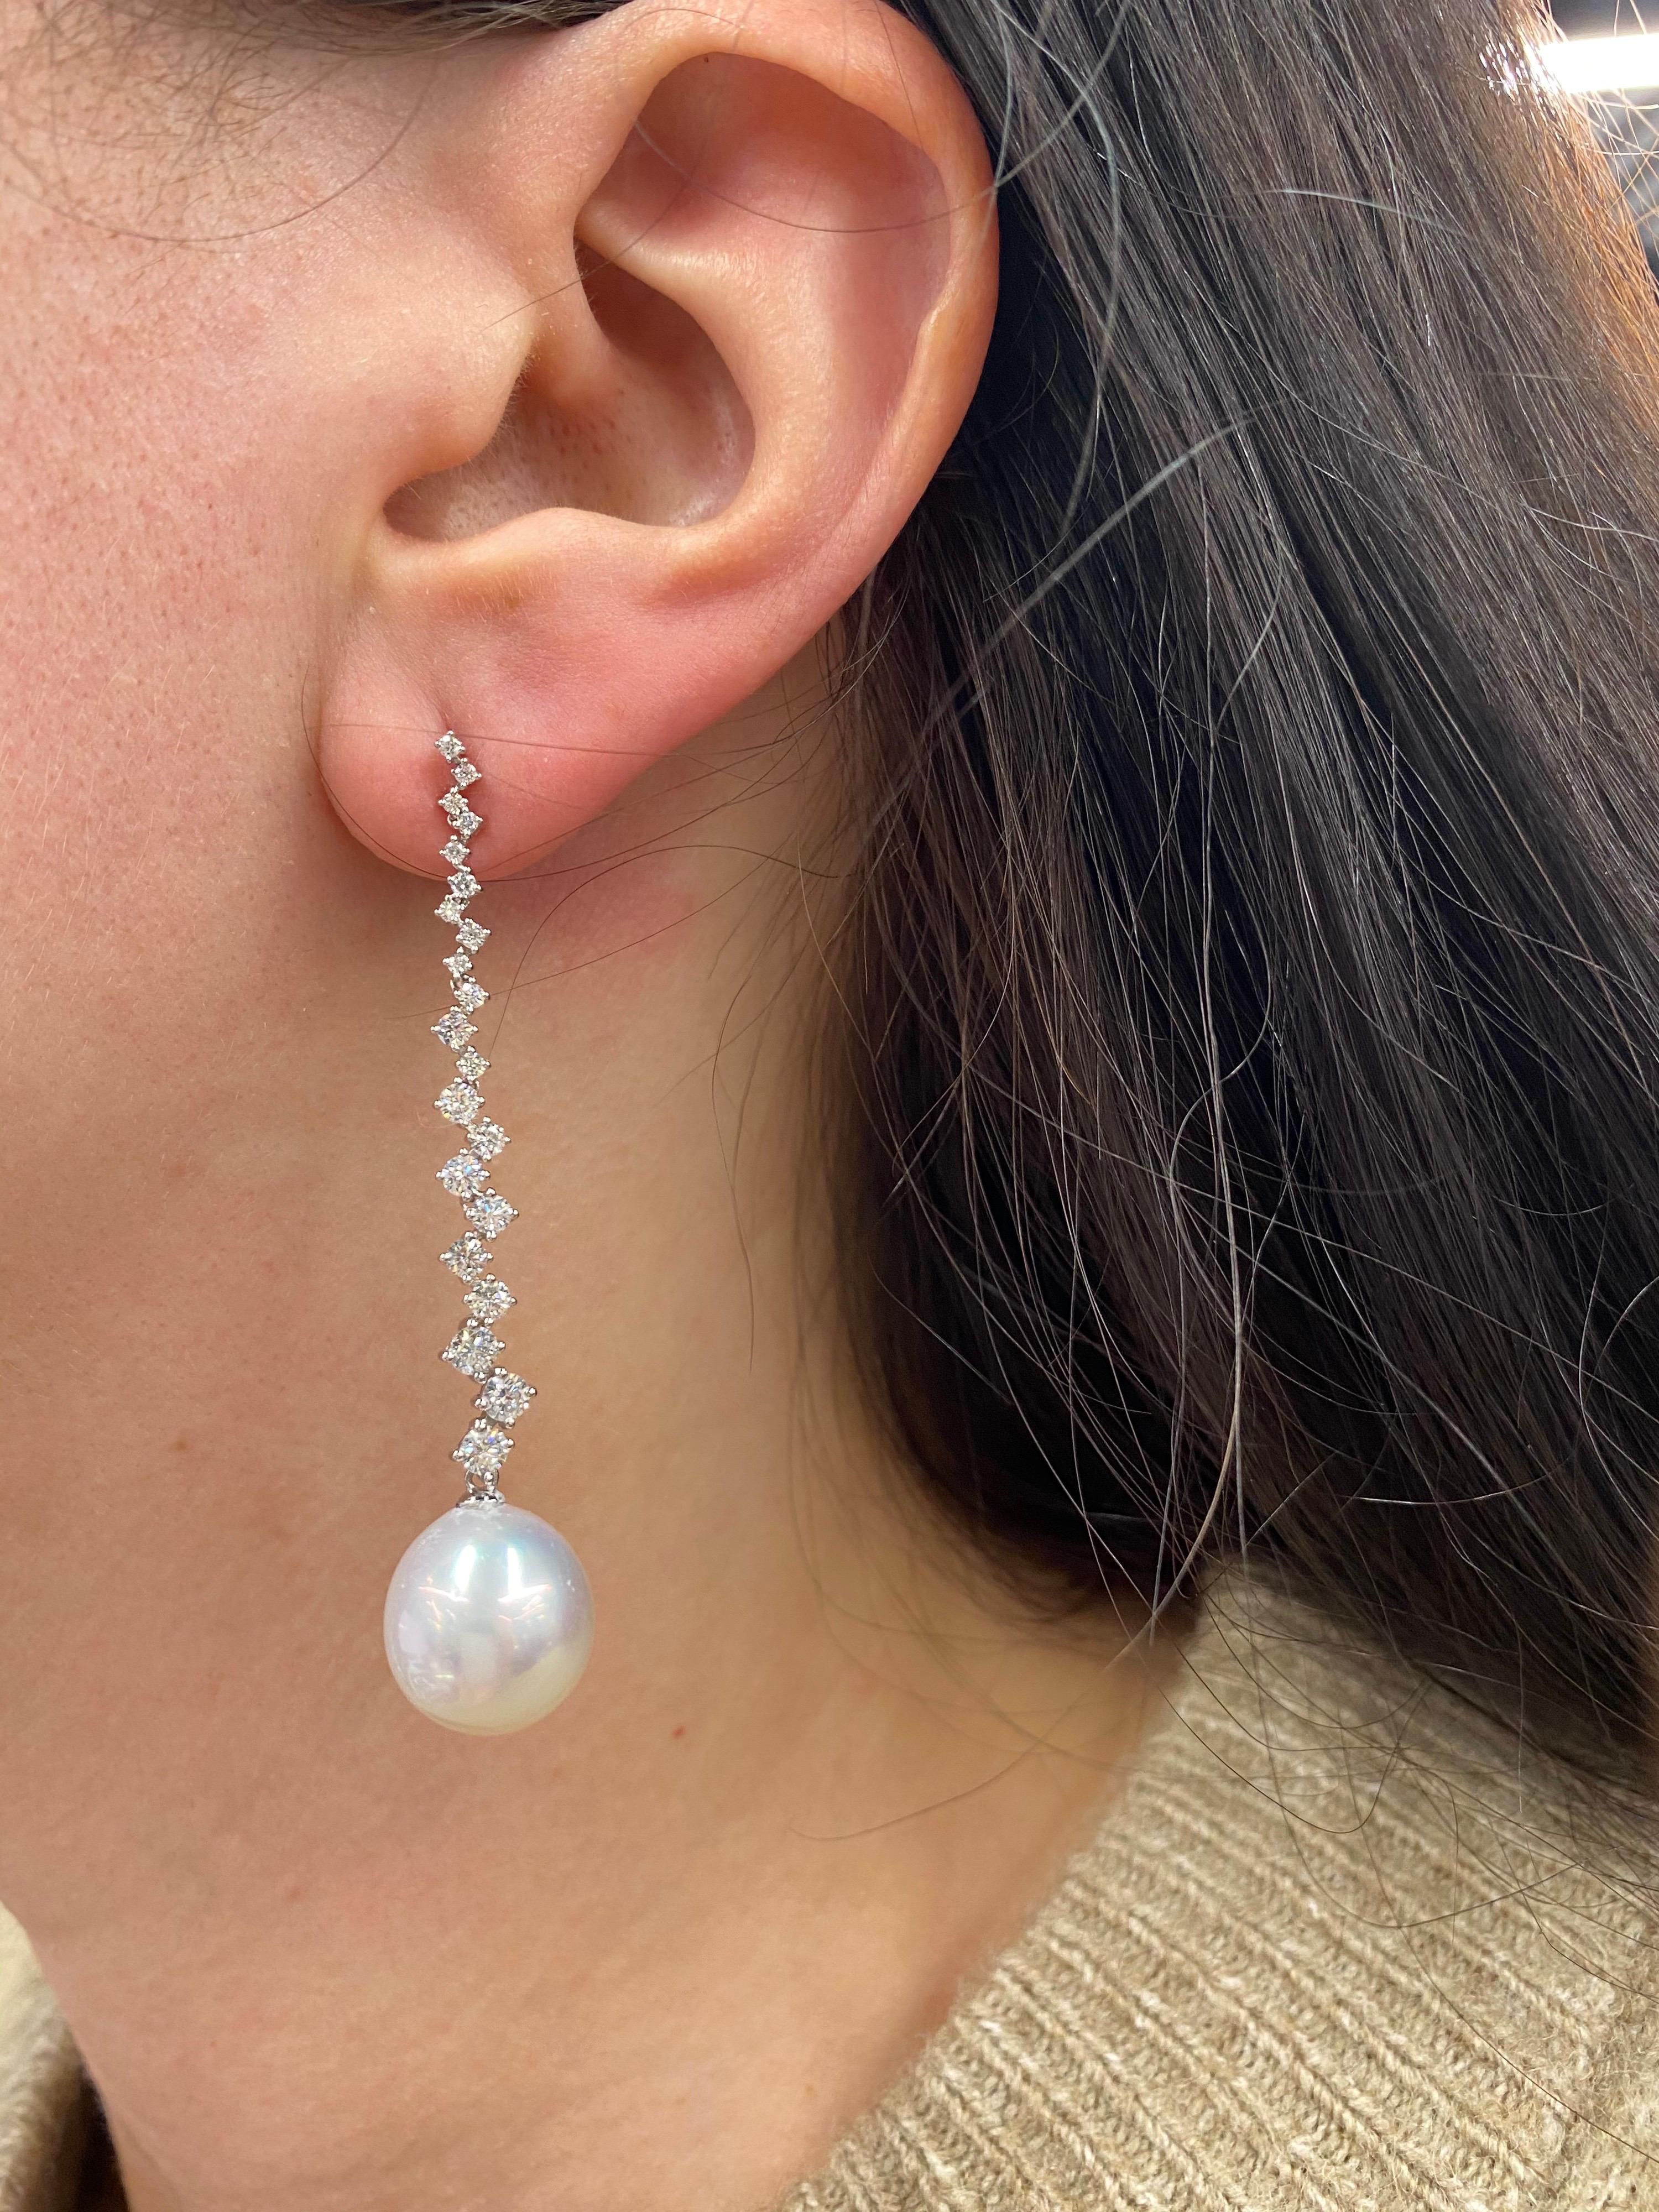 18K White gold drop earrings featuring two South Sea Pearls measuring 12-13 mm with 42 round brilliants weighing 1.53 carats.
Color G-H
Clarity SI

Pearls can be changed to Tahitian, Golden or Pink.
Price subject to change. 